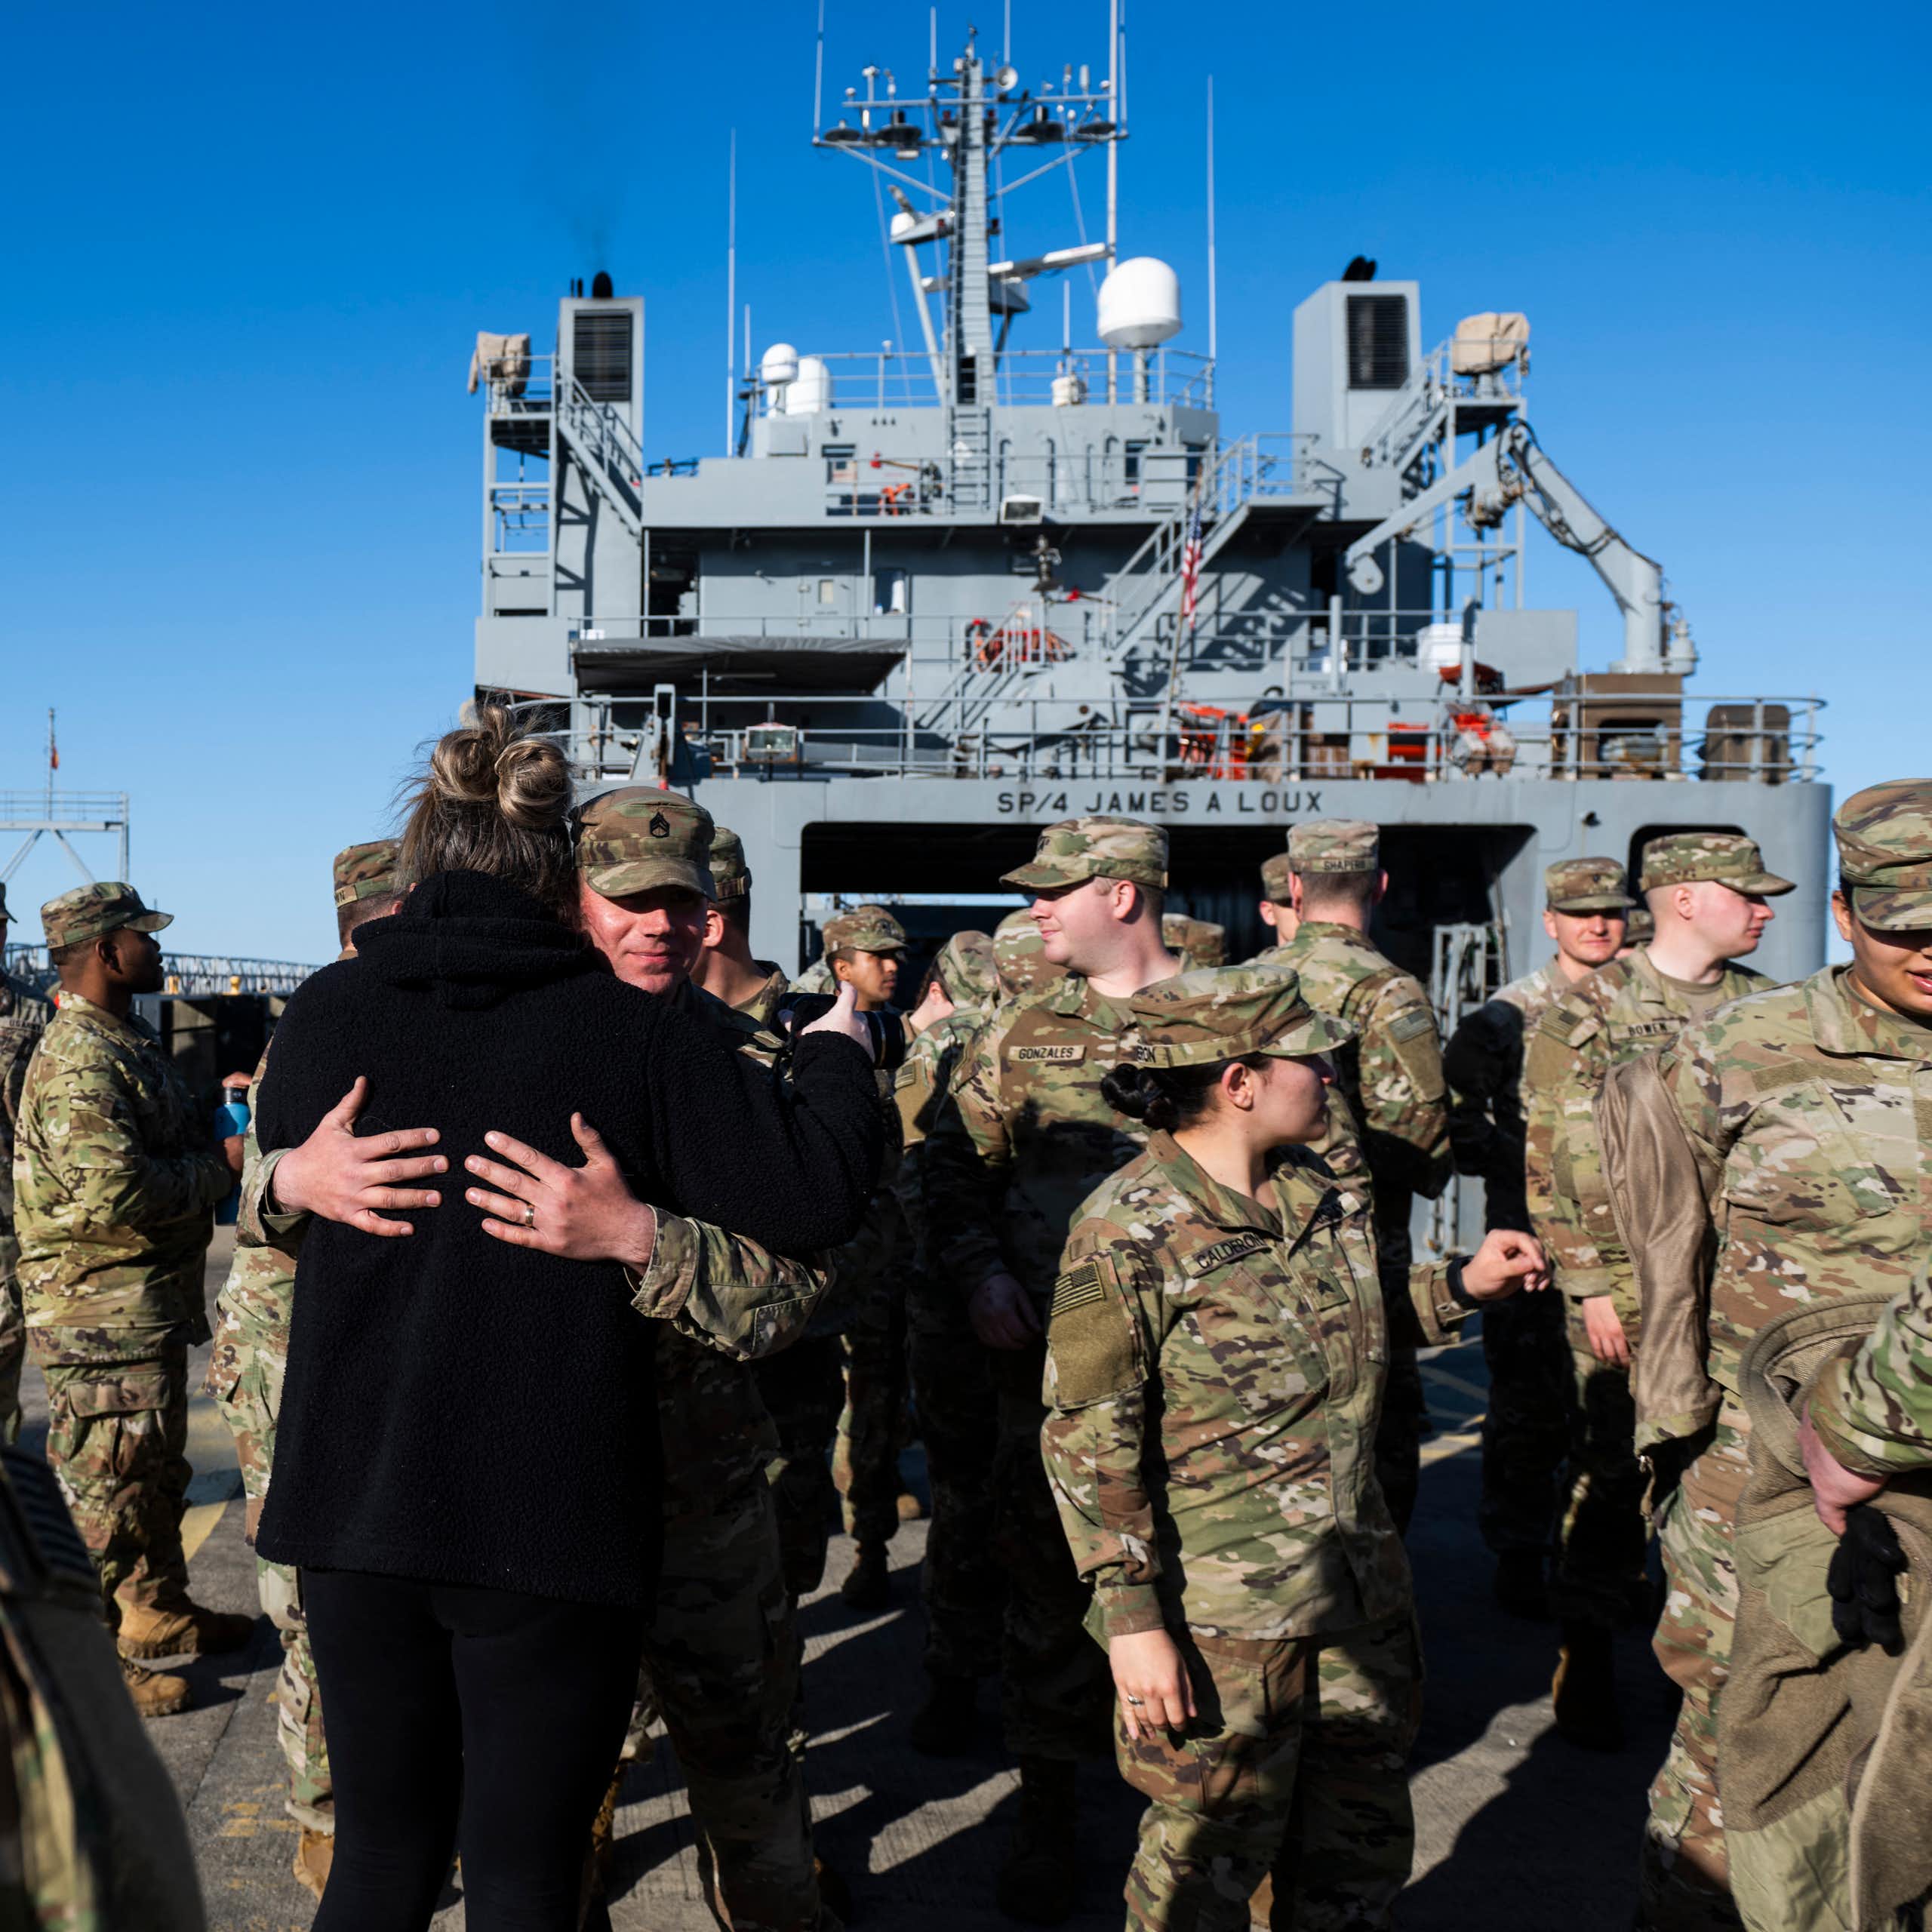 Men and women in fatigues embrace on a military ship.